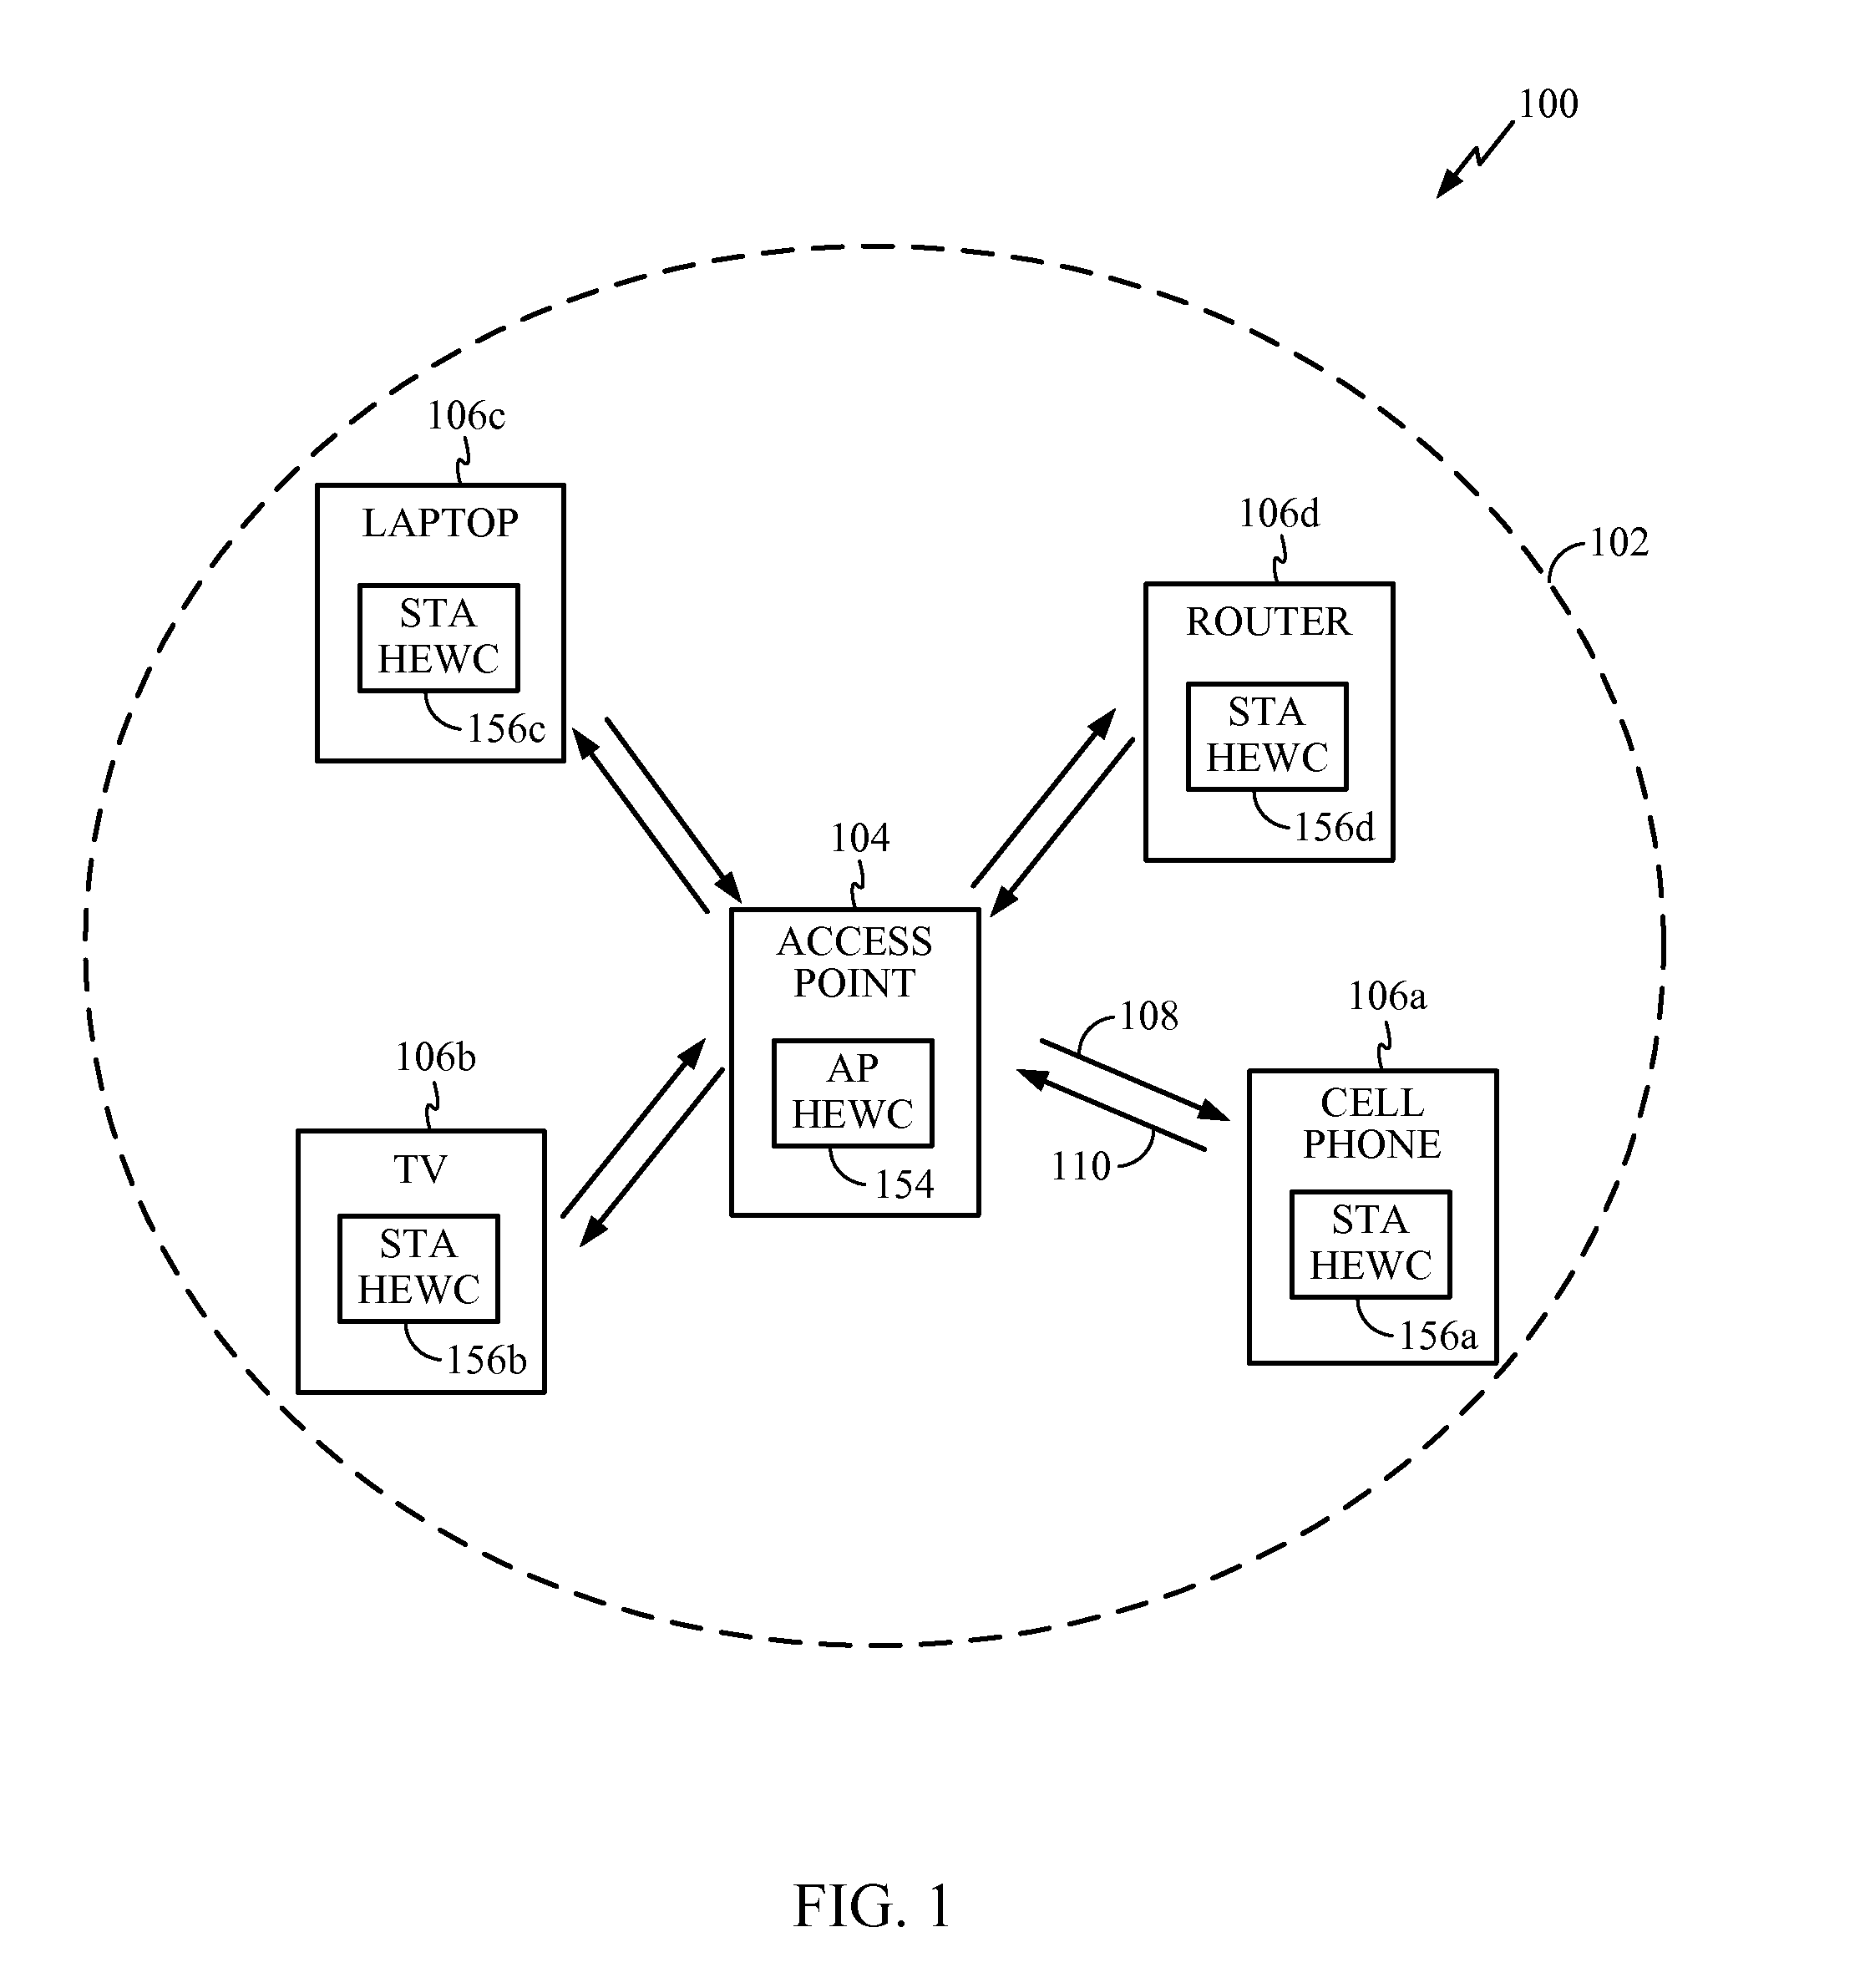 Staggered primary channels for WIFI